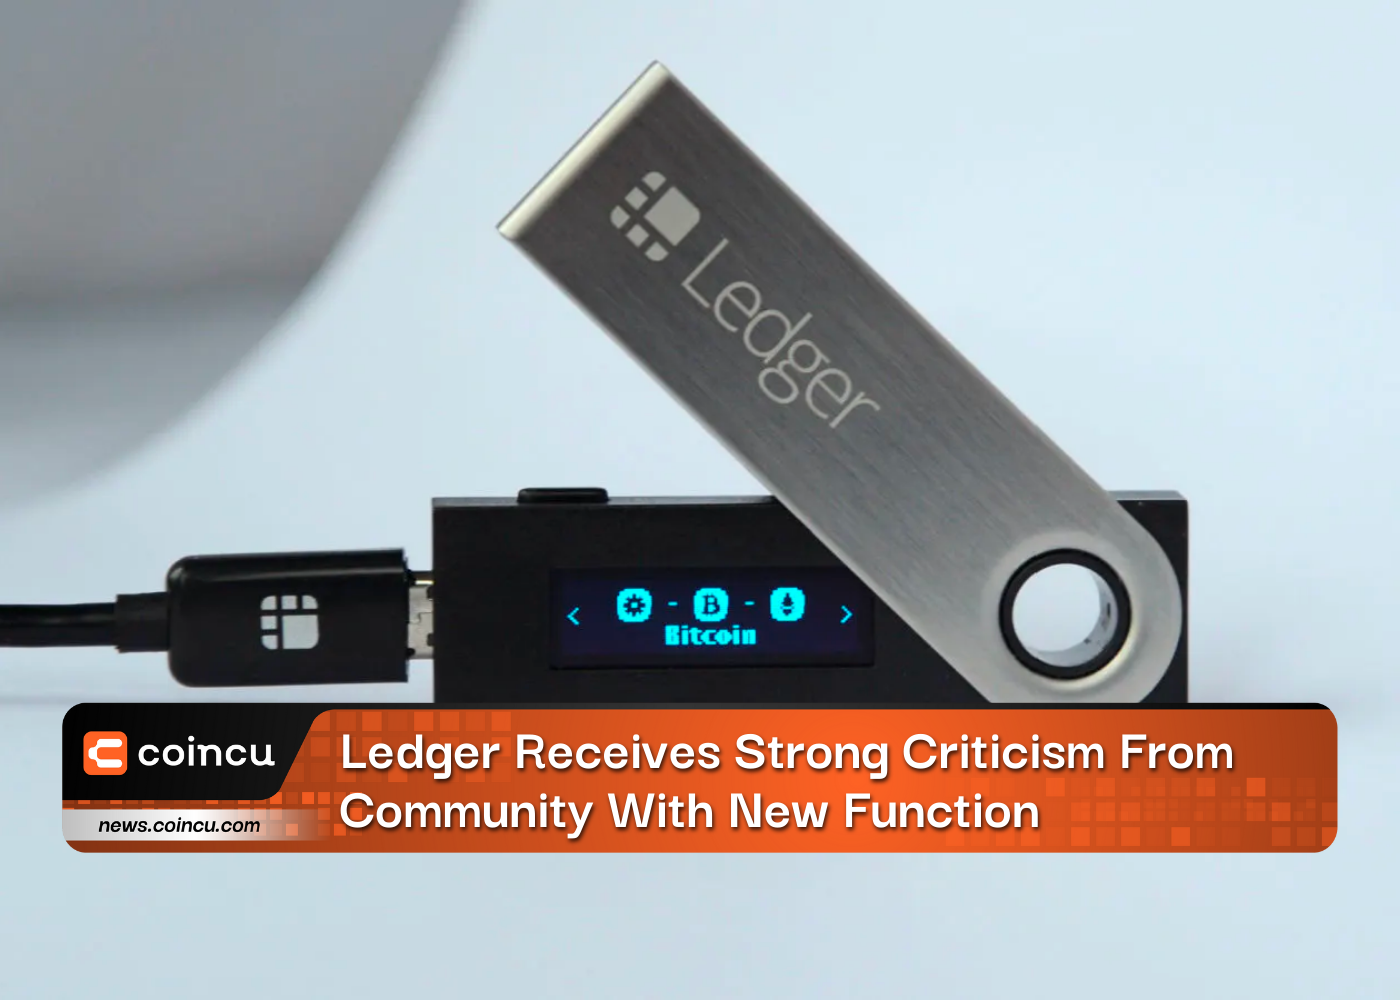 Ledger Receives Strong Criticism From Community With New Function